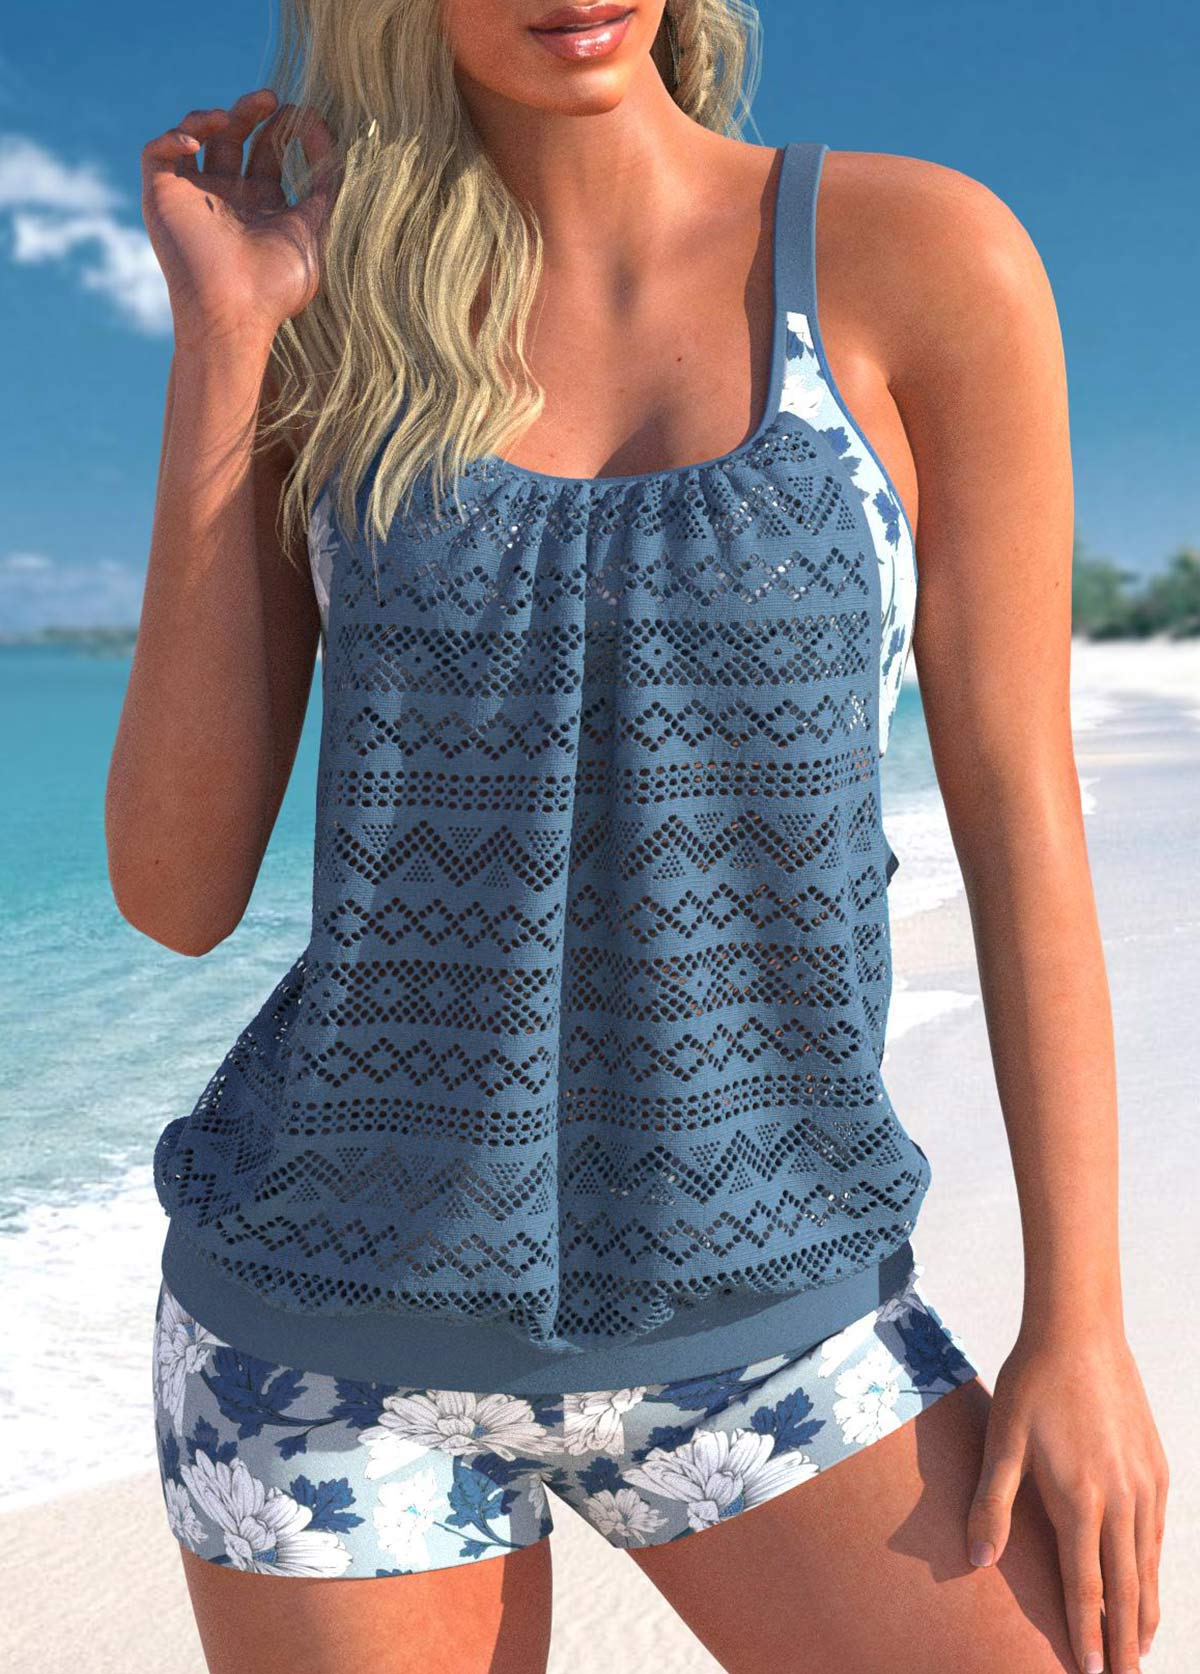 Lace Floral Print Dusty Blue Tankini Top-No Bottom